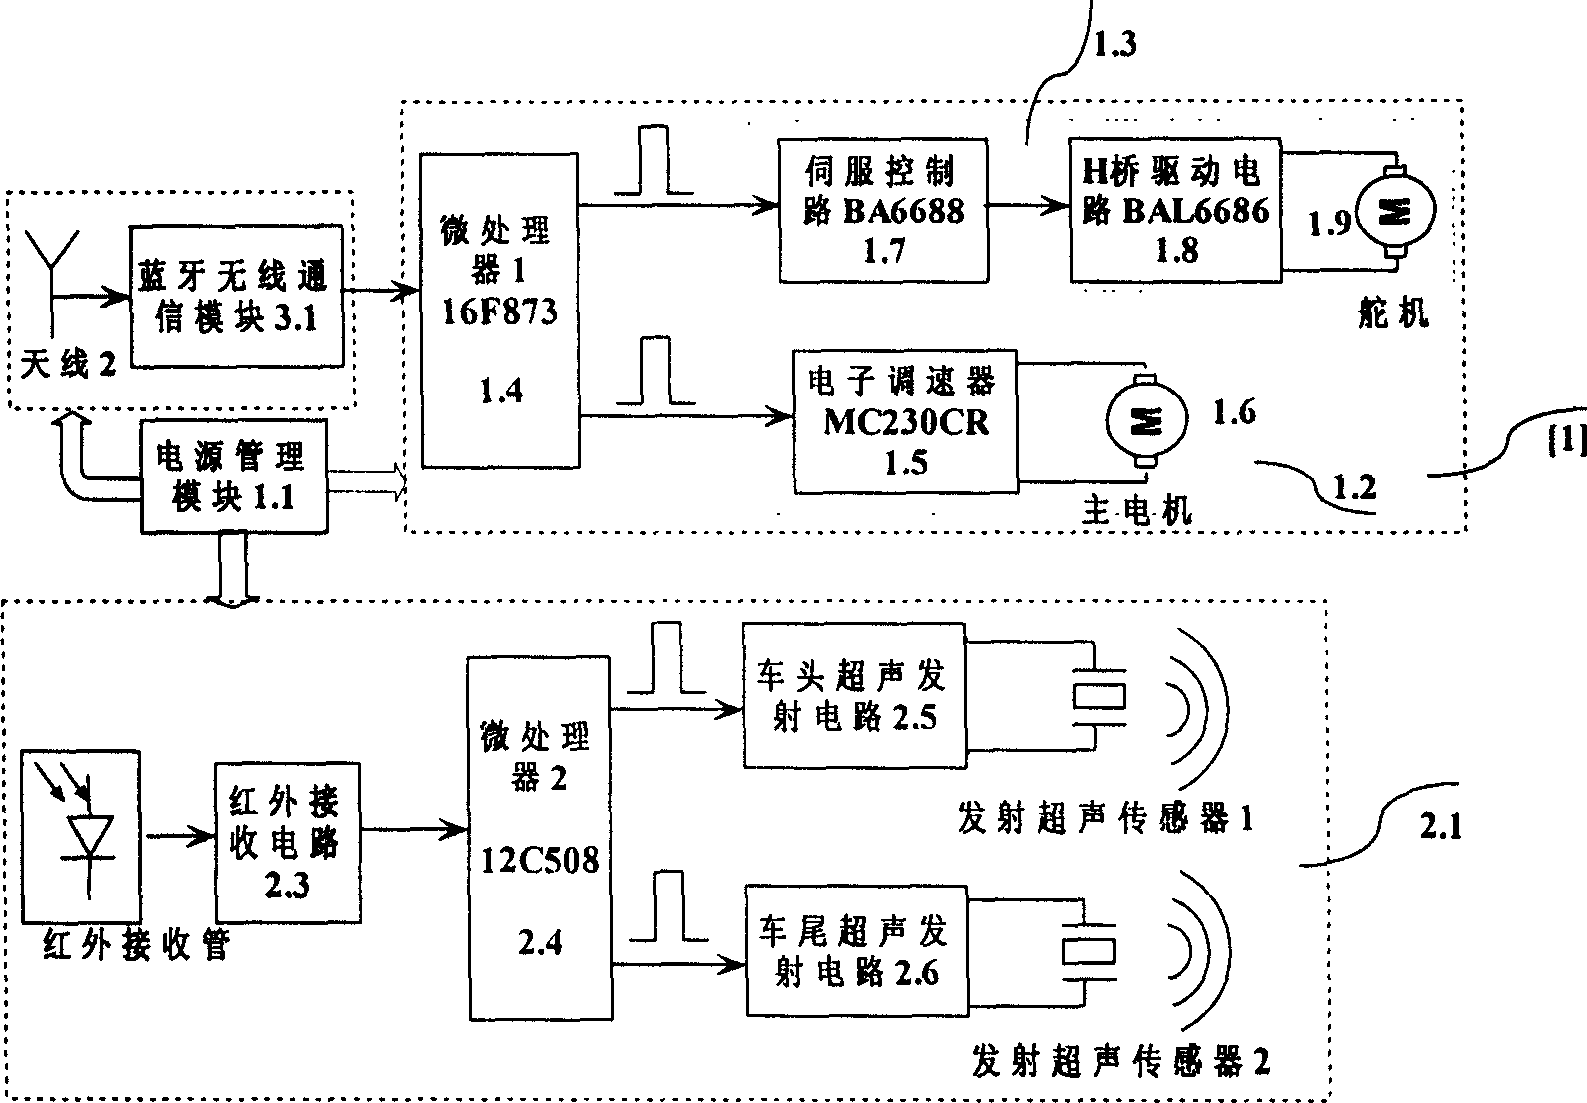 System for automatically leading vehicle wireless positioning, navigating and controlling